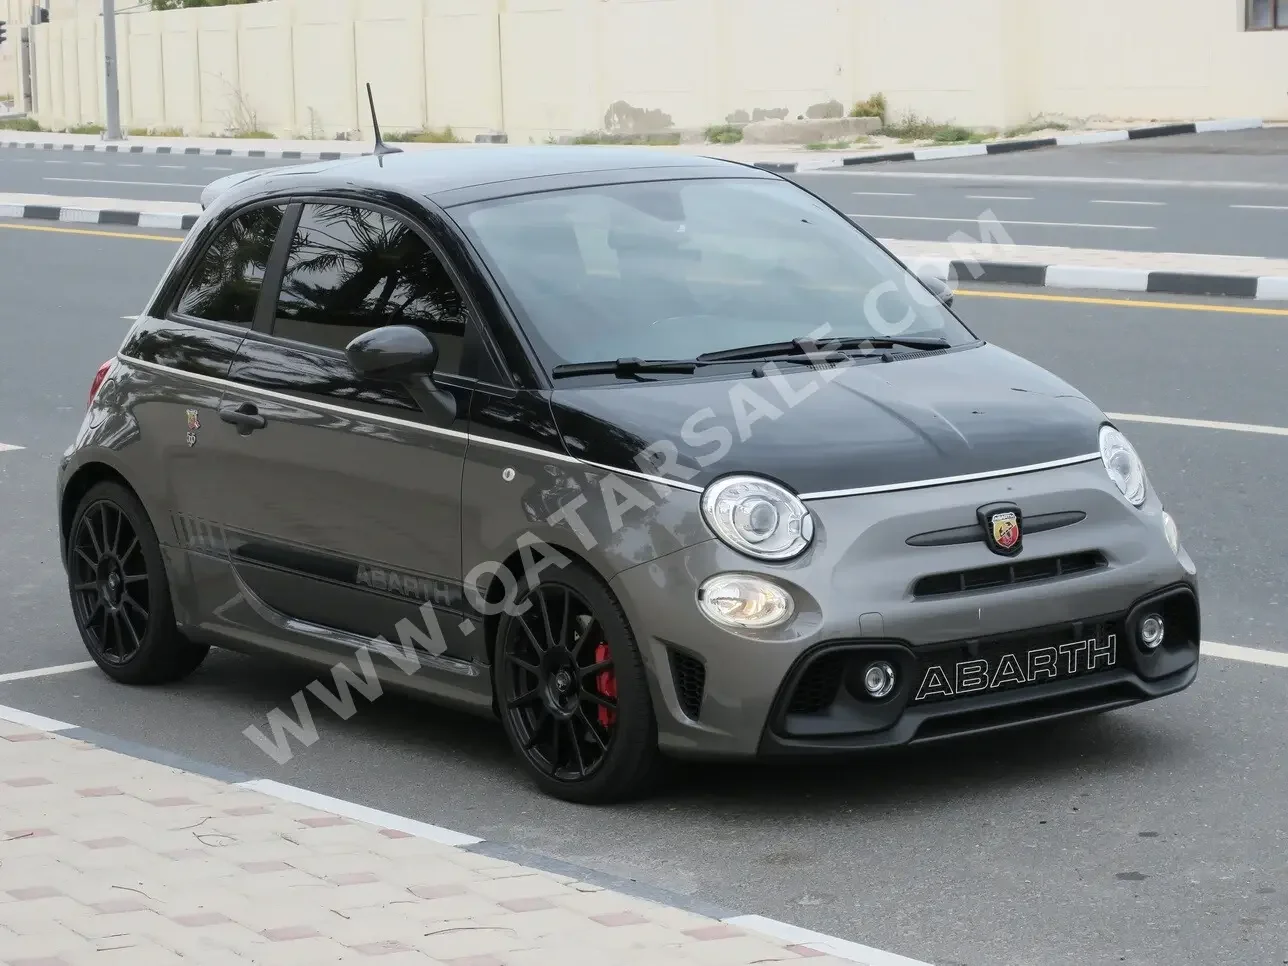 Fiat  595  Abarth  2020  Automatic  2,700 Km  4 Cylinder  Front Wheel Drive (FWD)  Hatchback  Black and Gray